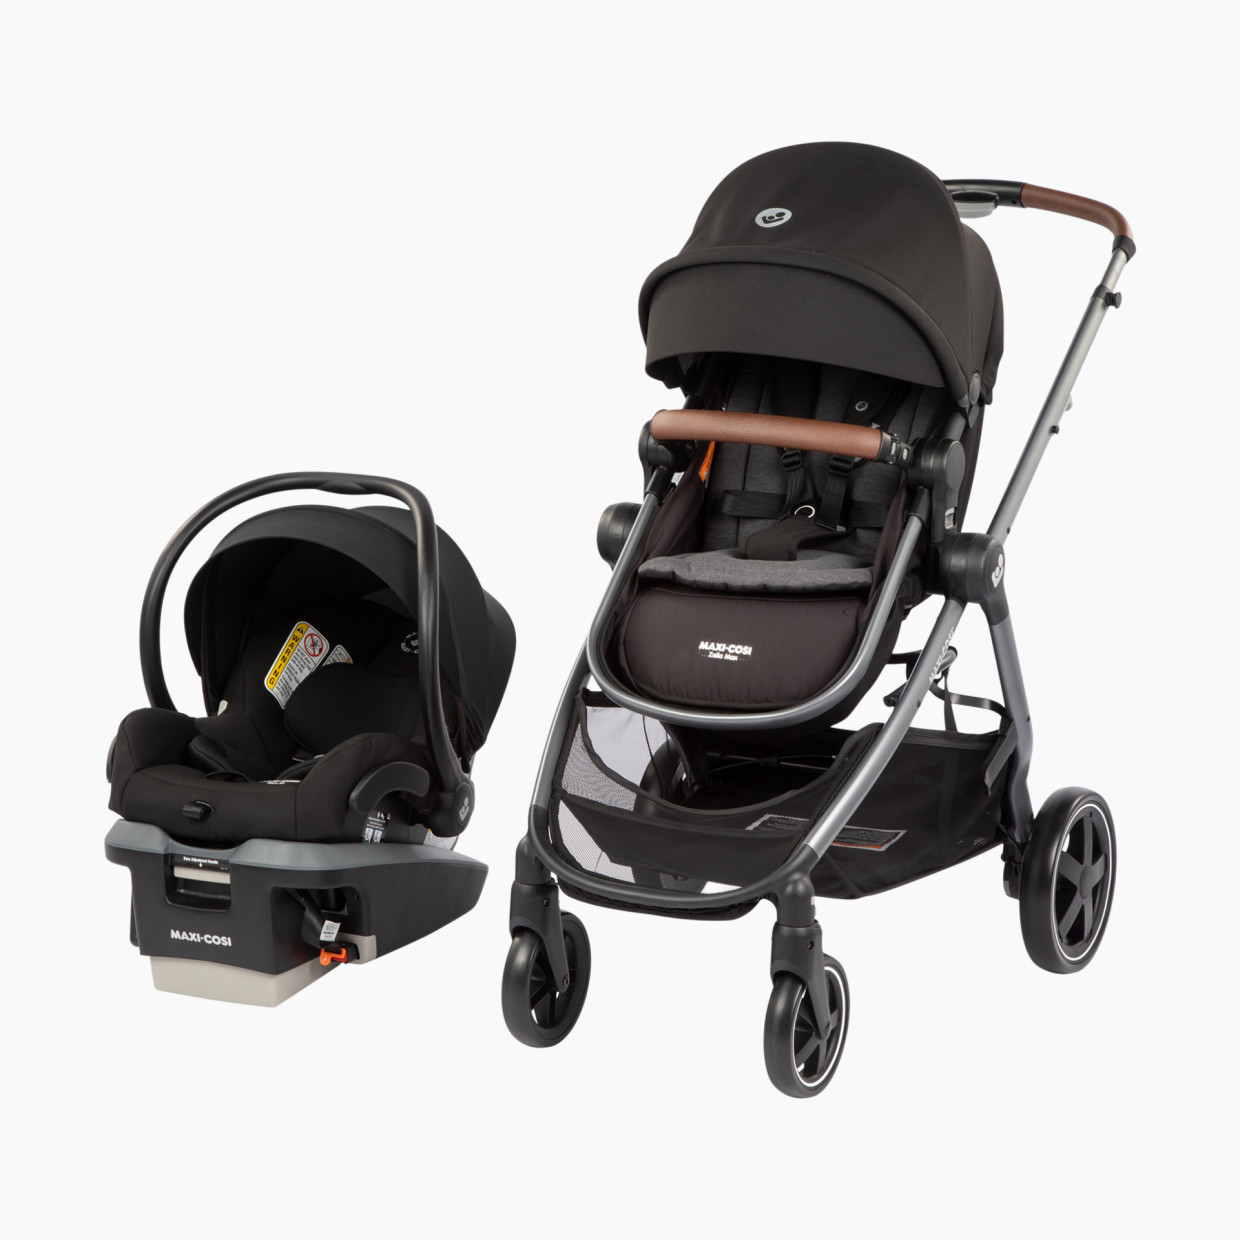 Maxi-Cosi Zelia2 Max5-in-1 Modular Travel System with Mico XP - Essential Black.